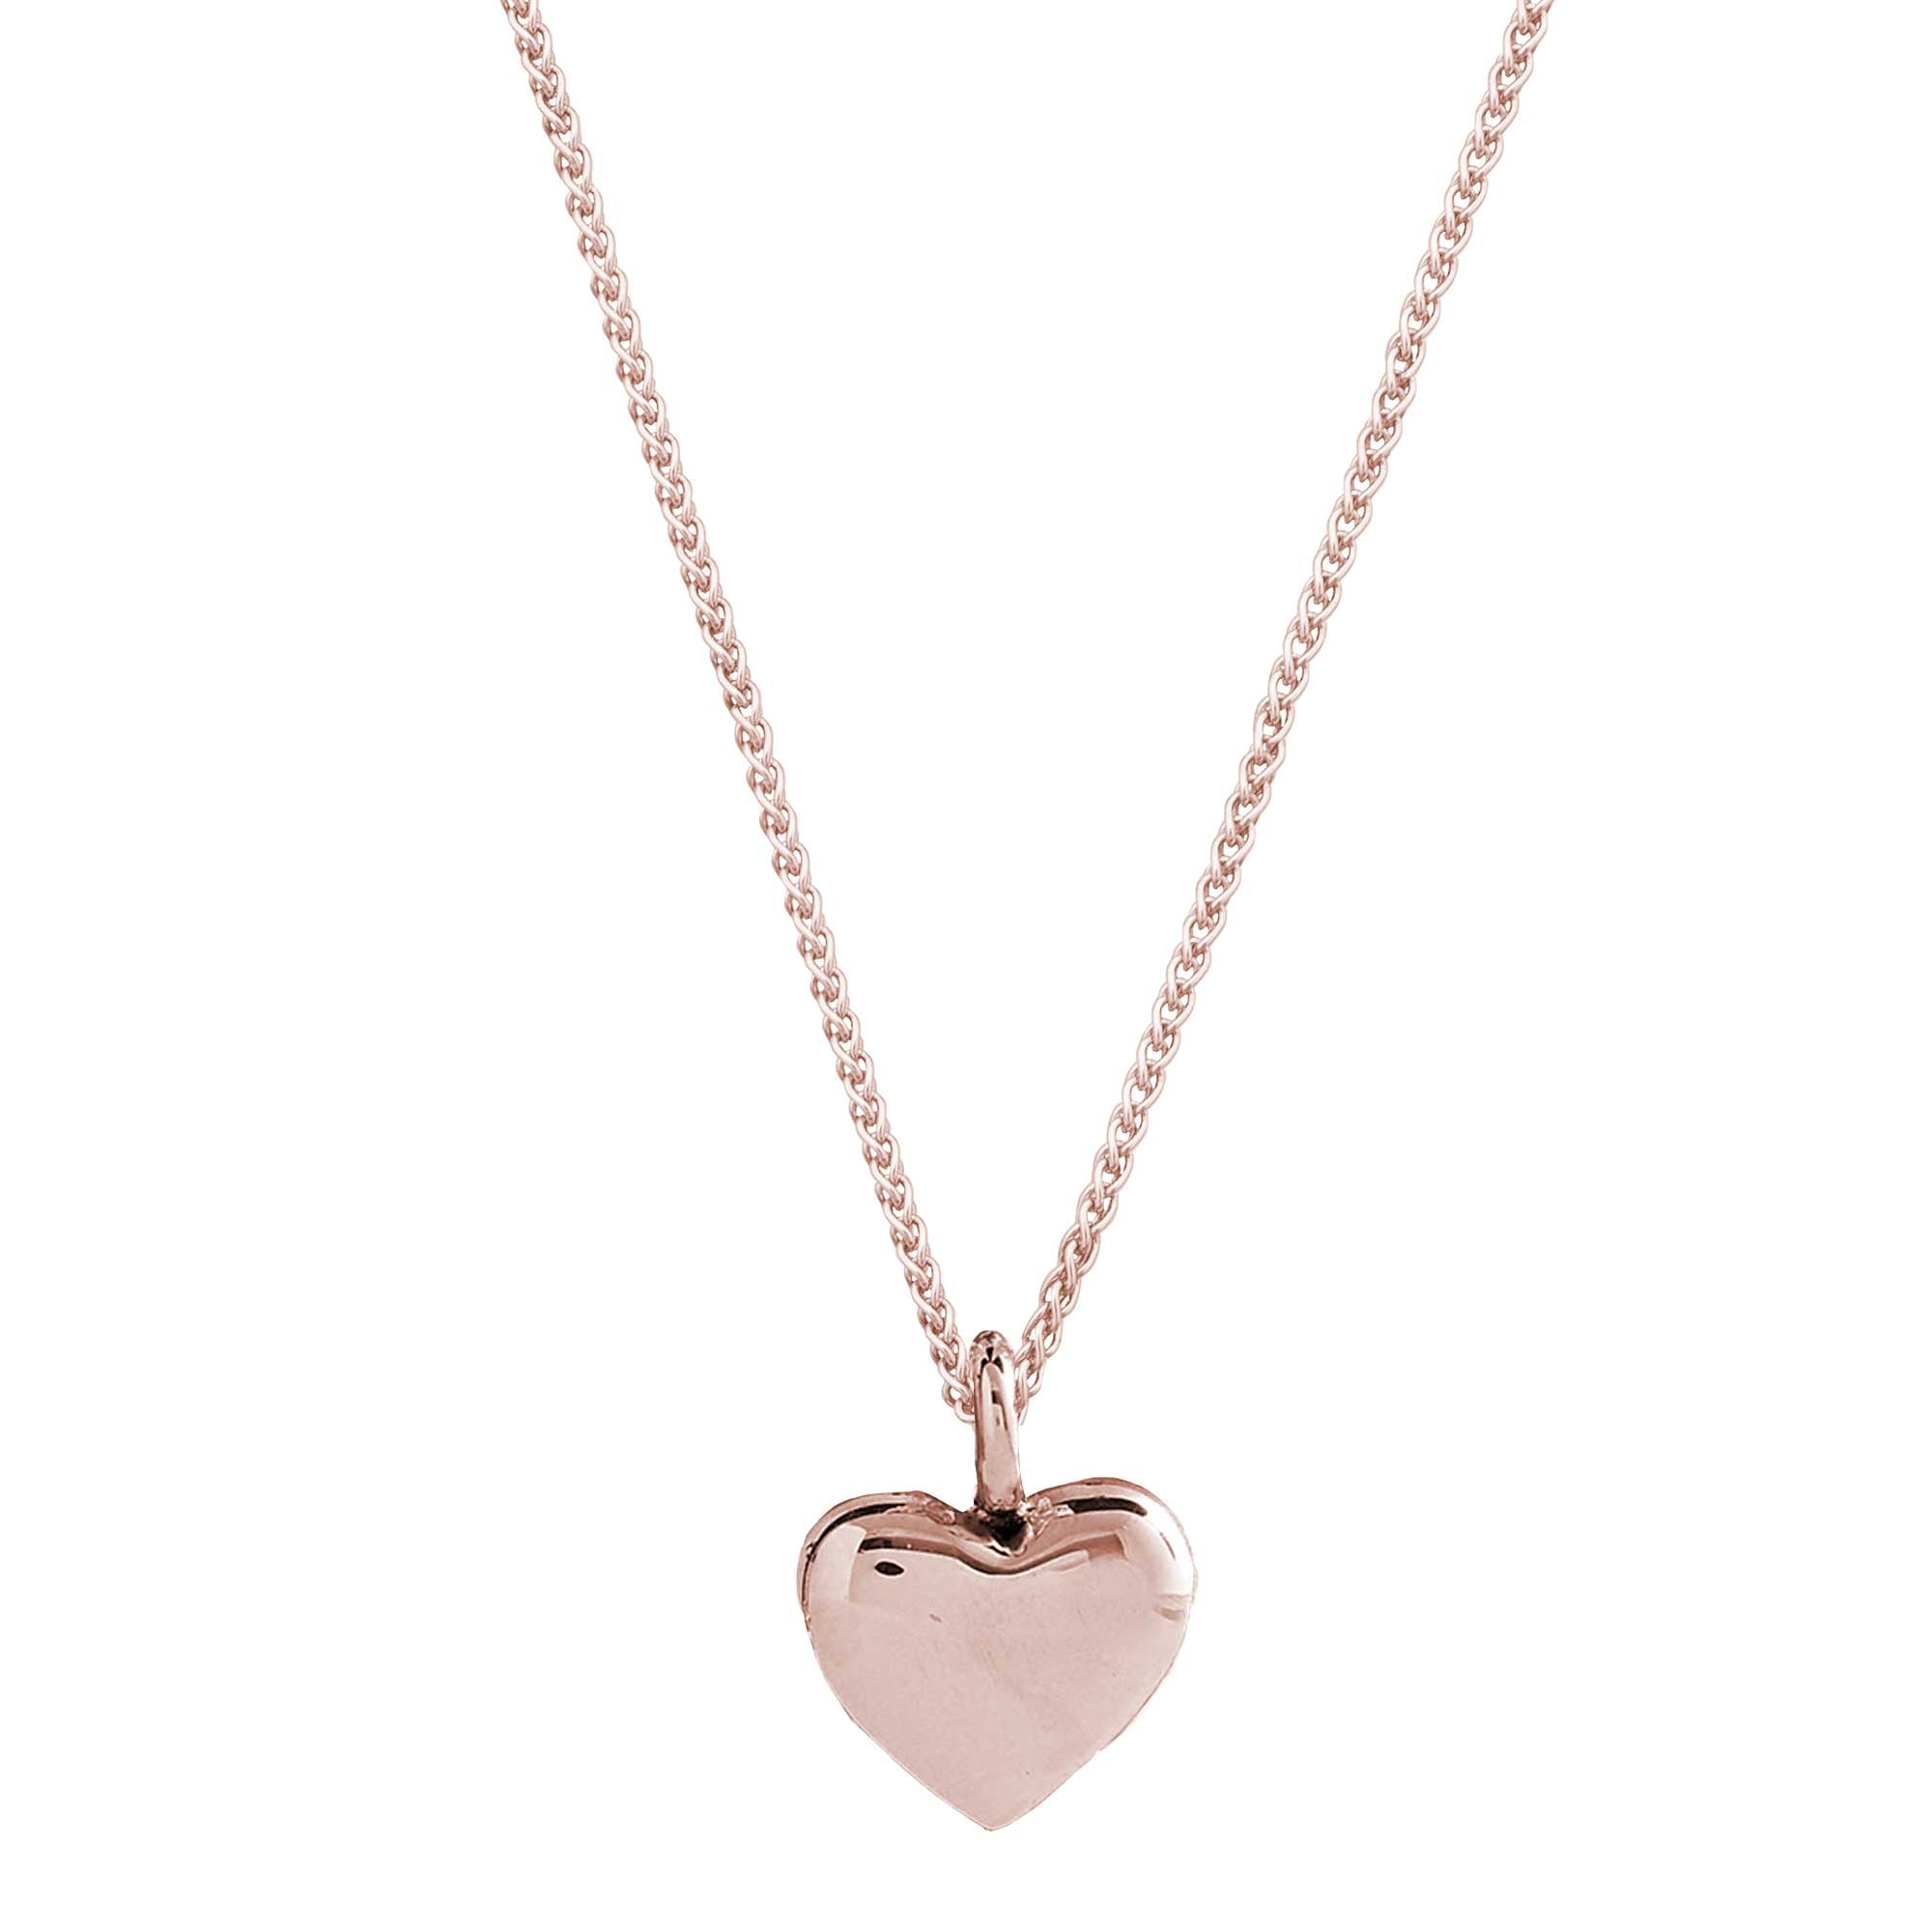 solid rose gold heart pendant necklace for women christmas gift for her Scarlett Jewellery